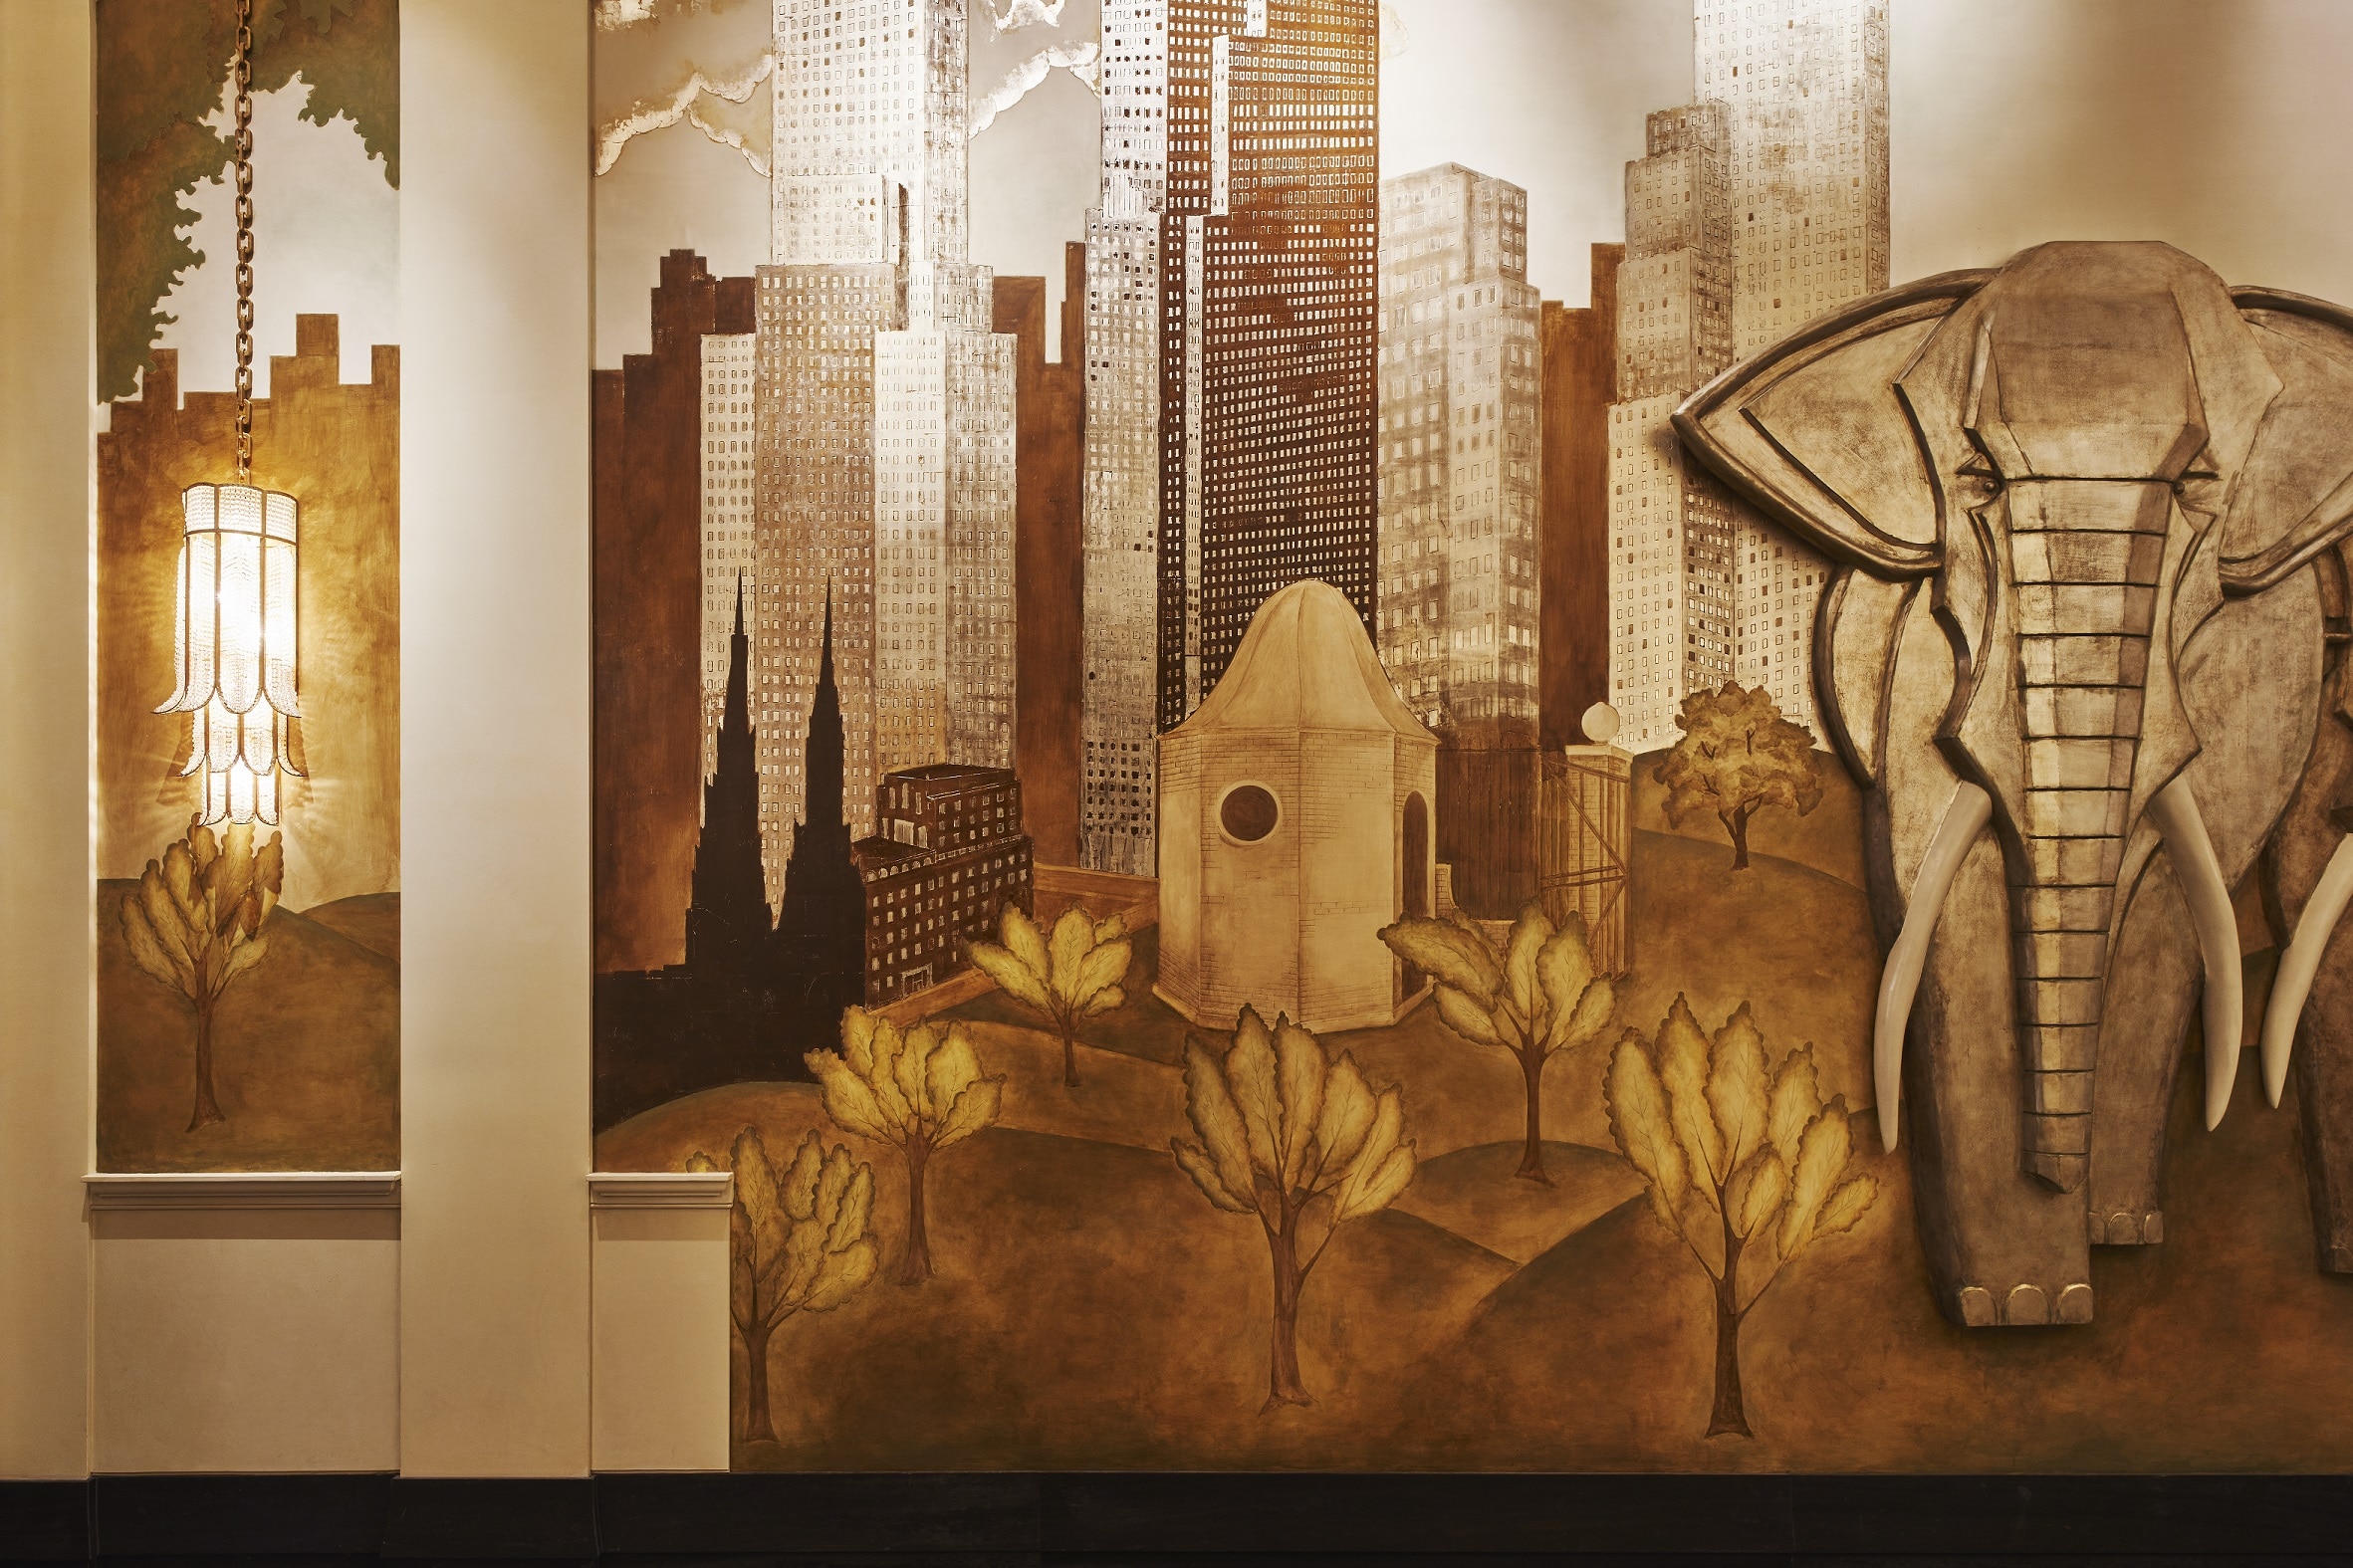 View of detailed mural with gold trim and an elephant inside the lobby of 111 West 57th street condominiums in New York City.